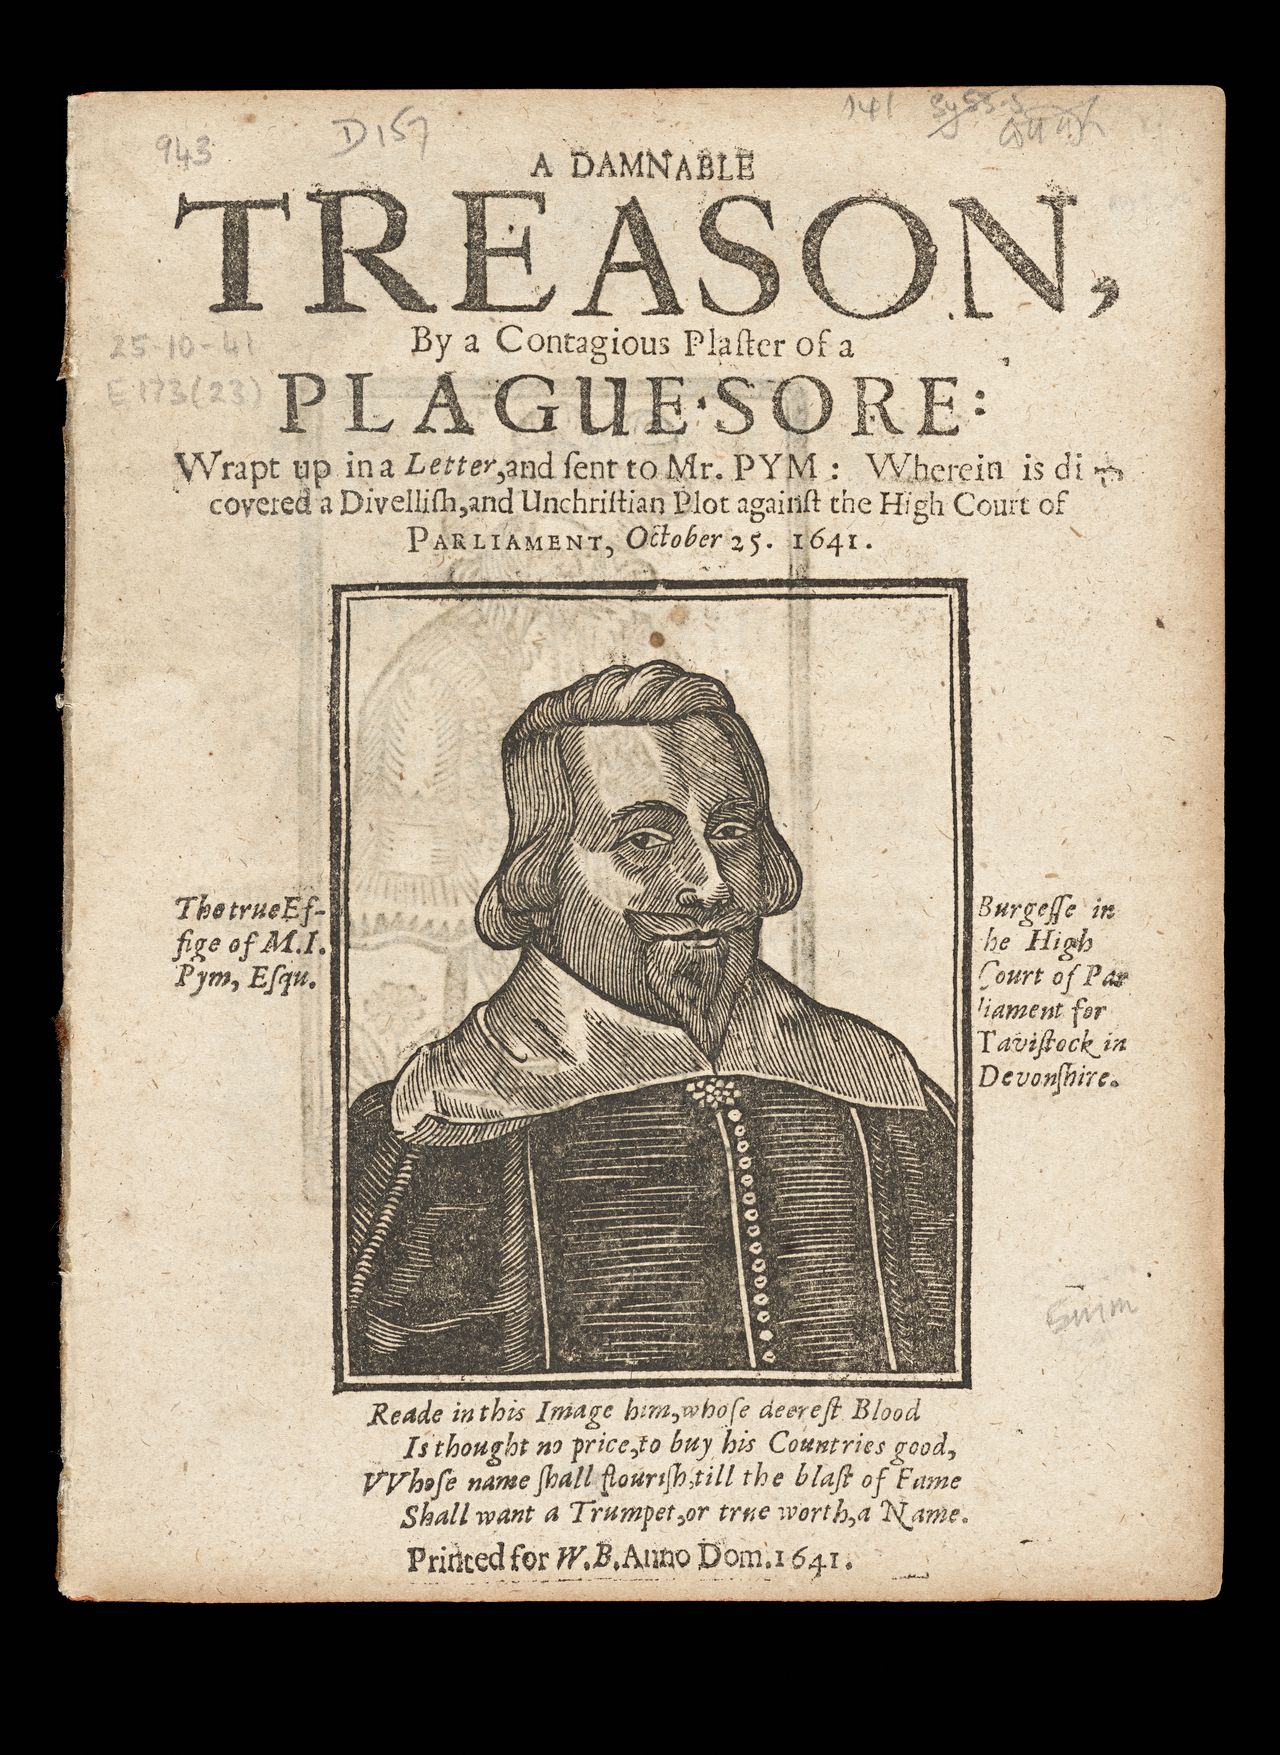 <em>A damnable treason, by a contagious plaster of a plague-sore: wrapt up in a letter, and sent to Mr. Pym: wherein is discovered a divellish, and unchristian plot against the High Court of Parliament, October 25. 1641.</em>, London, printed for W.B., 1641, State Library Victoria, Melbourne (RAREEMM 837/8)